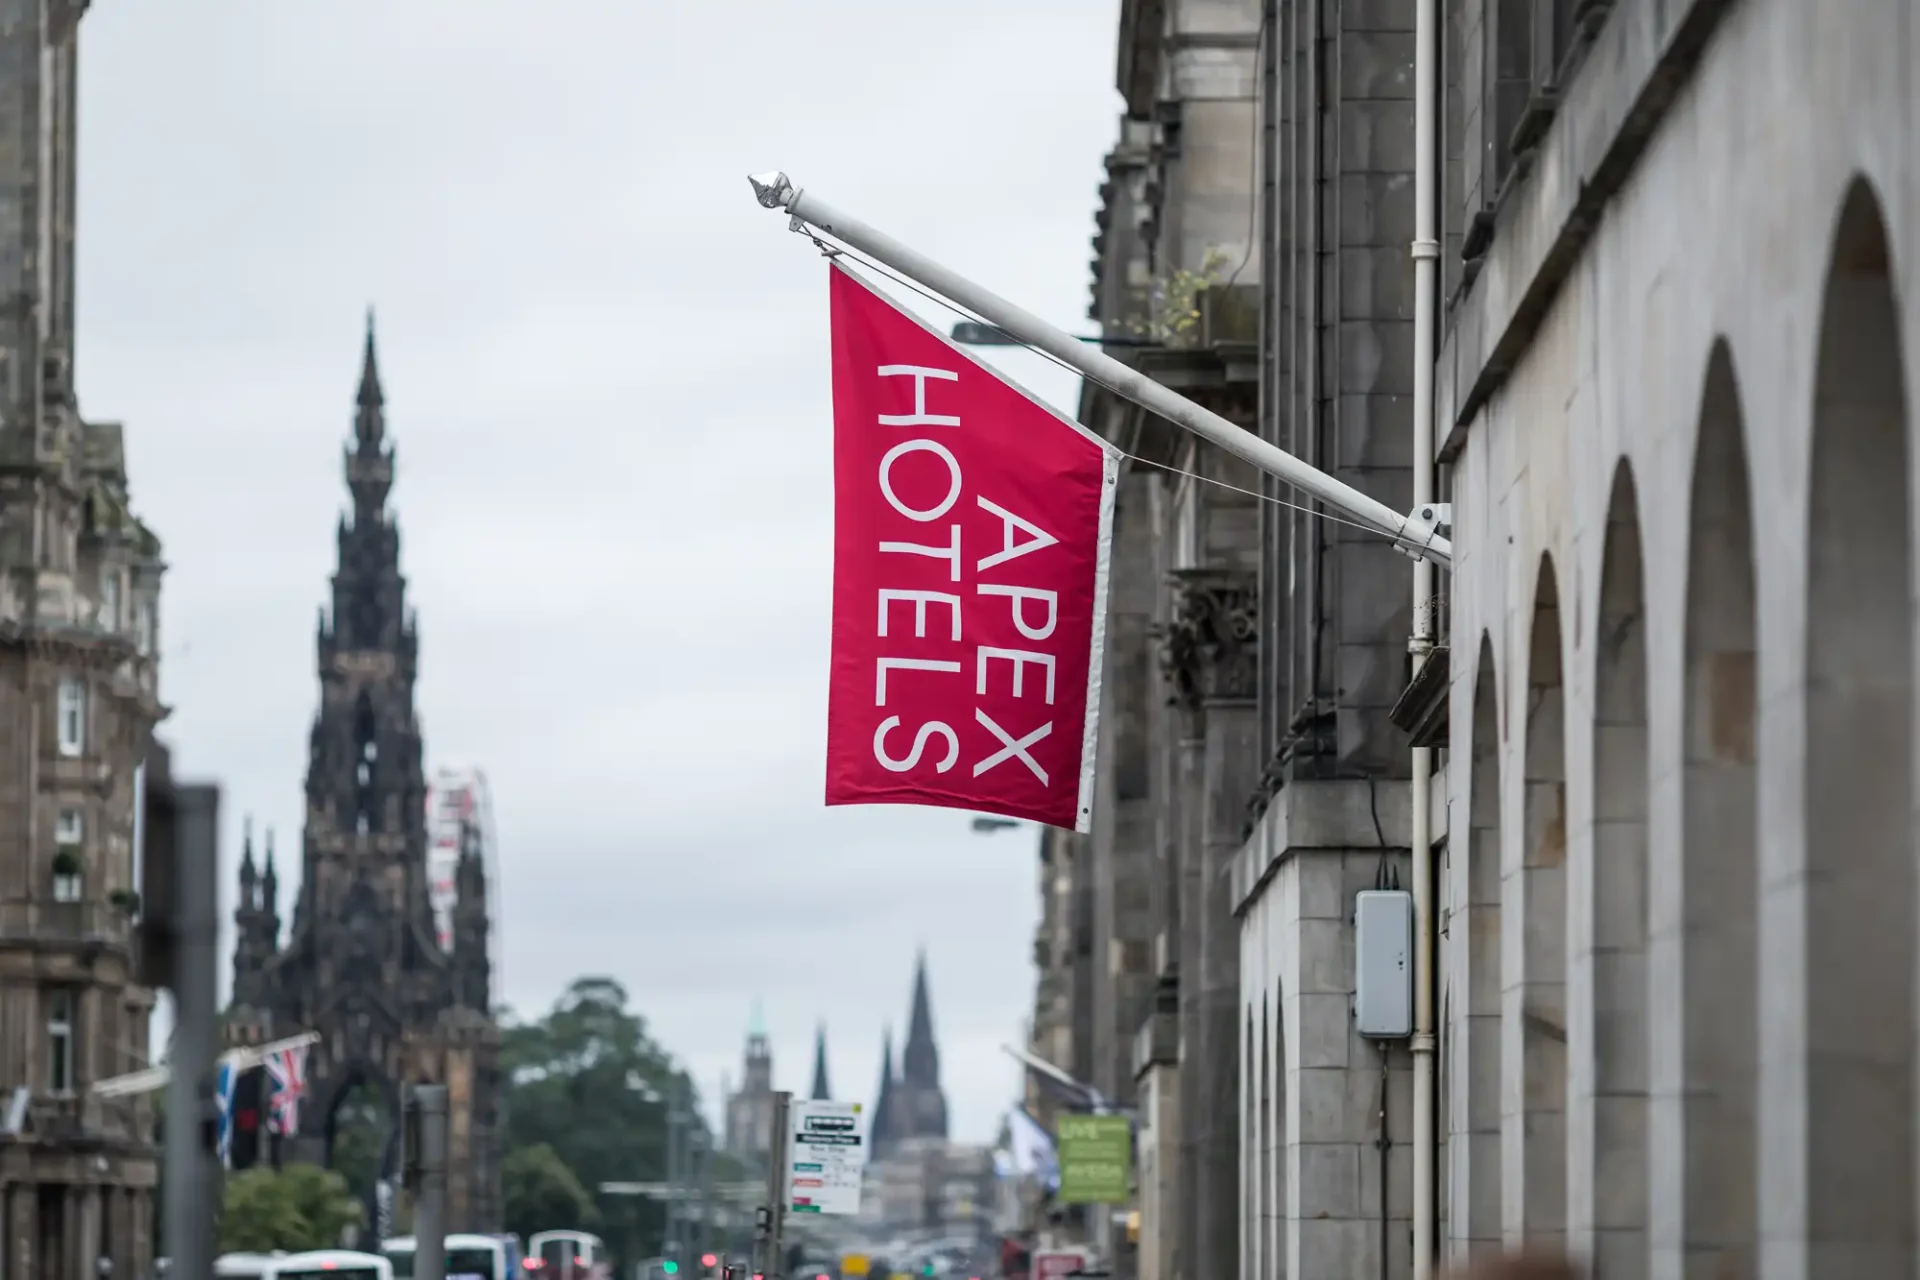 An apex hotels flag protrudes from a building, with edinburgh's scott monument visible in the background under a cloudy sky.